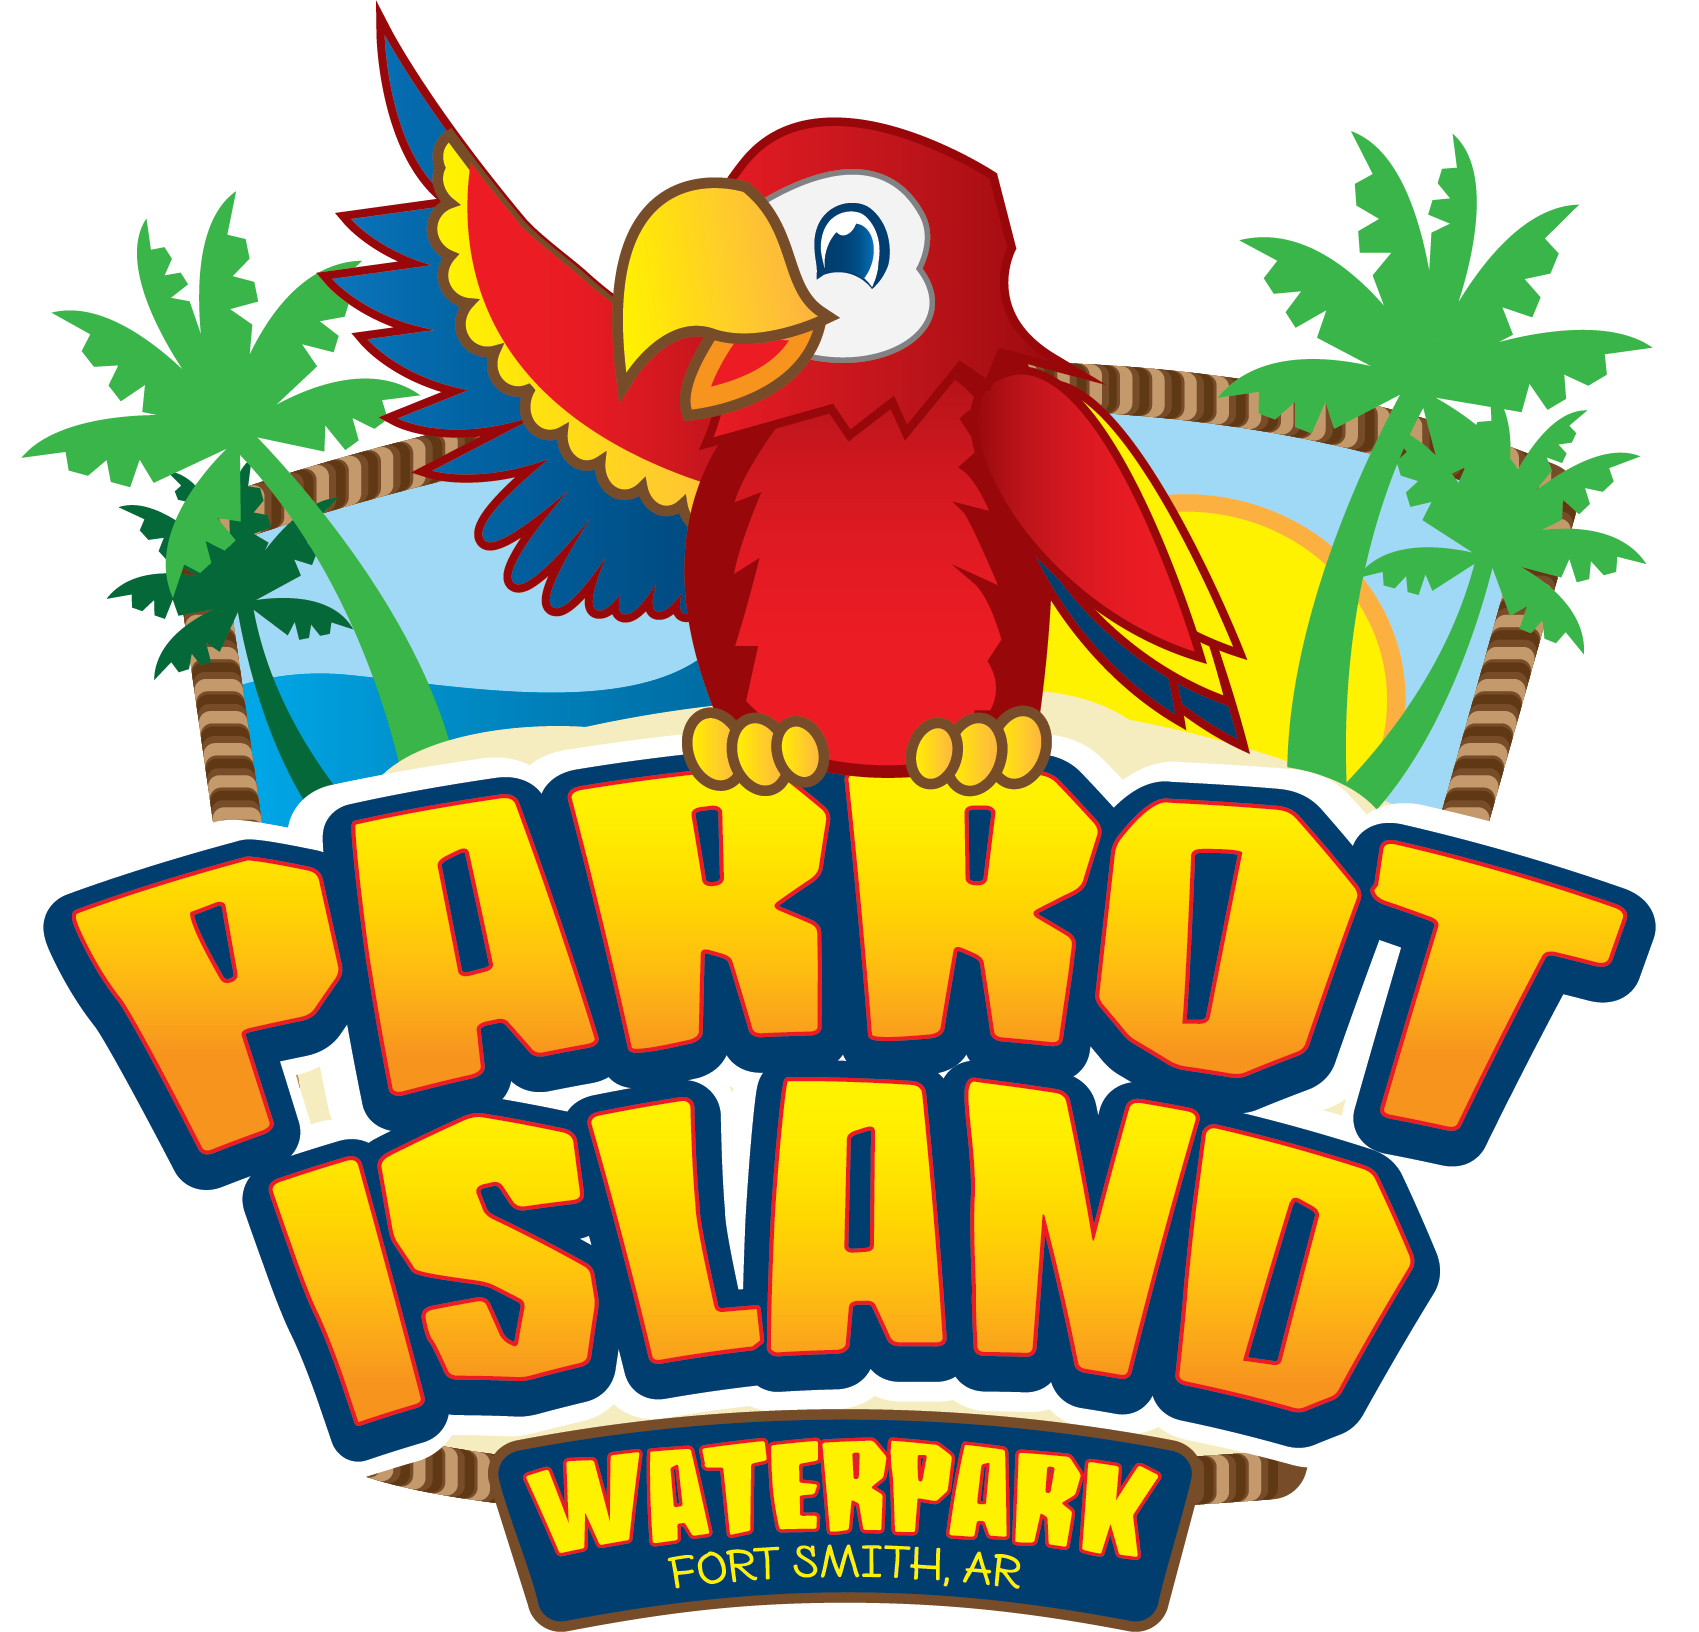 Parrot Island Waterpark - Parrot Island Fort Smith Ar (1699x1632)